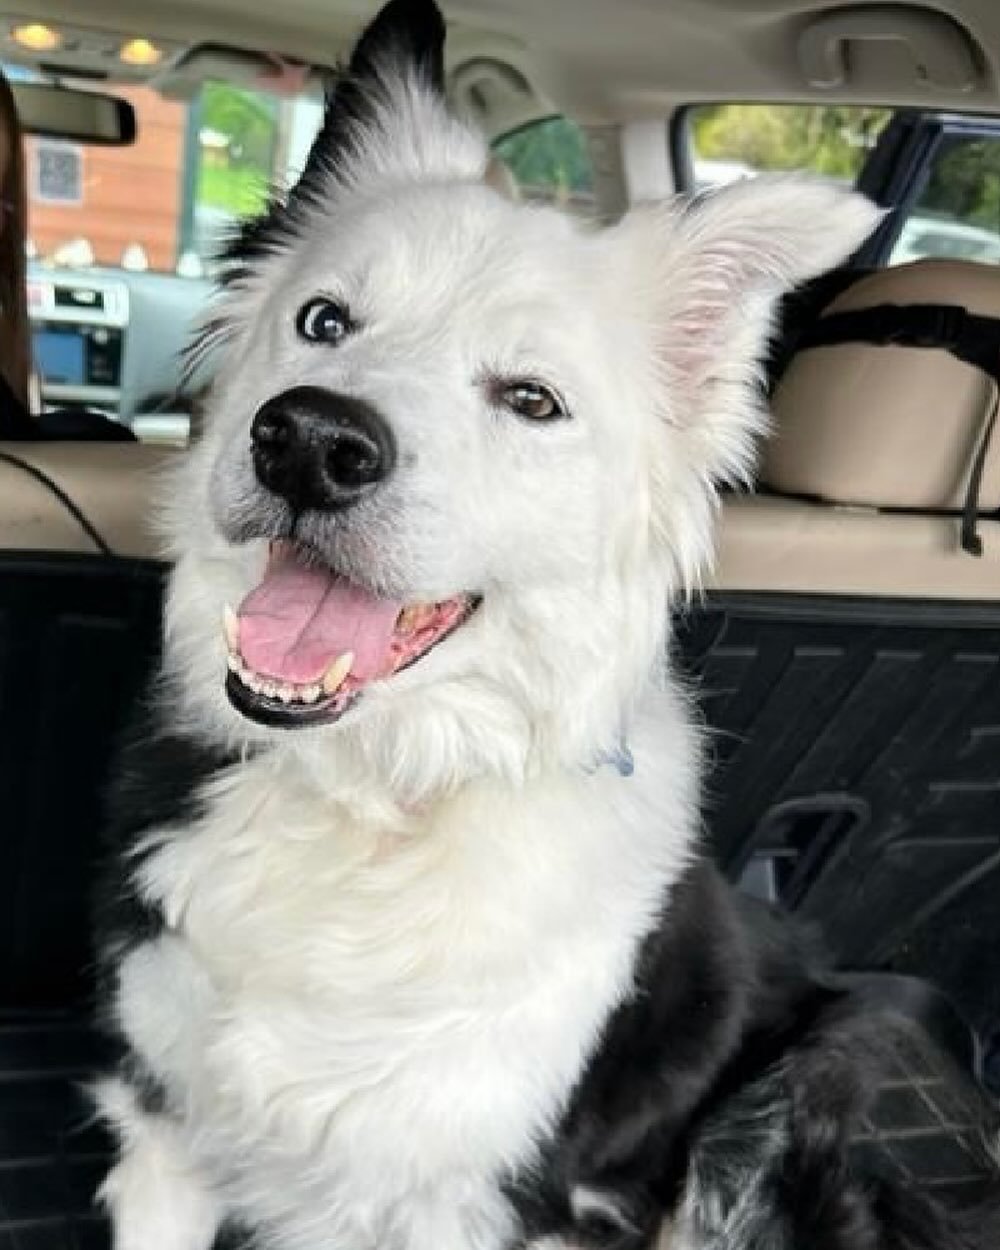 ❗️📣 NEW PUP ALERT! 📣❗️

🐾🐶 Hey, guess what? We have a new furry friend who needs a loving home! Say hello to Chase, a Border Collie Mix who&rsquo;s 13 years young! 🐾🐶

Chase has the most infectious smile and he&rsquo;s great with little kids 👶